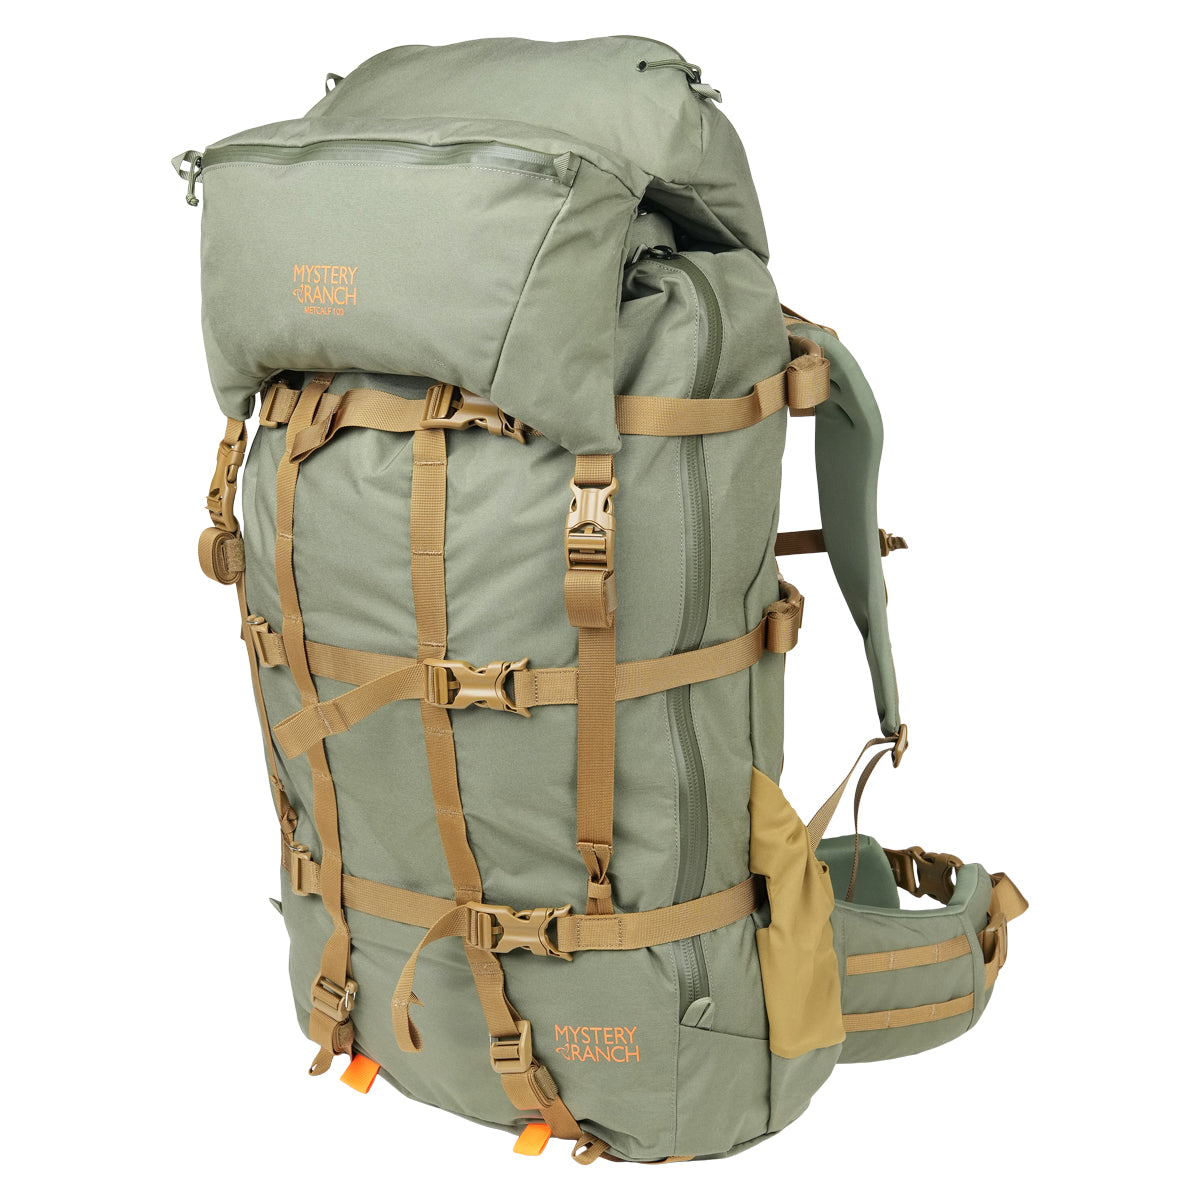 Mystery Ranch Metcalf 100 Backpack in Ponderosa by GOHUNT | Mystery Ranch - GOHUNT Shop